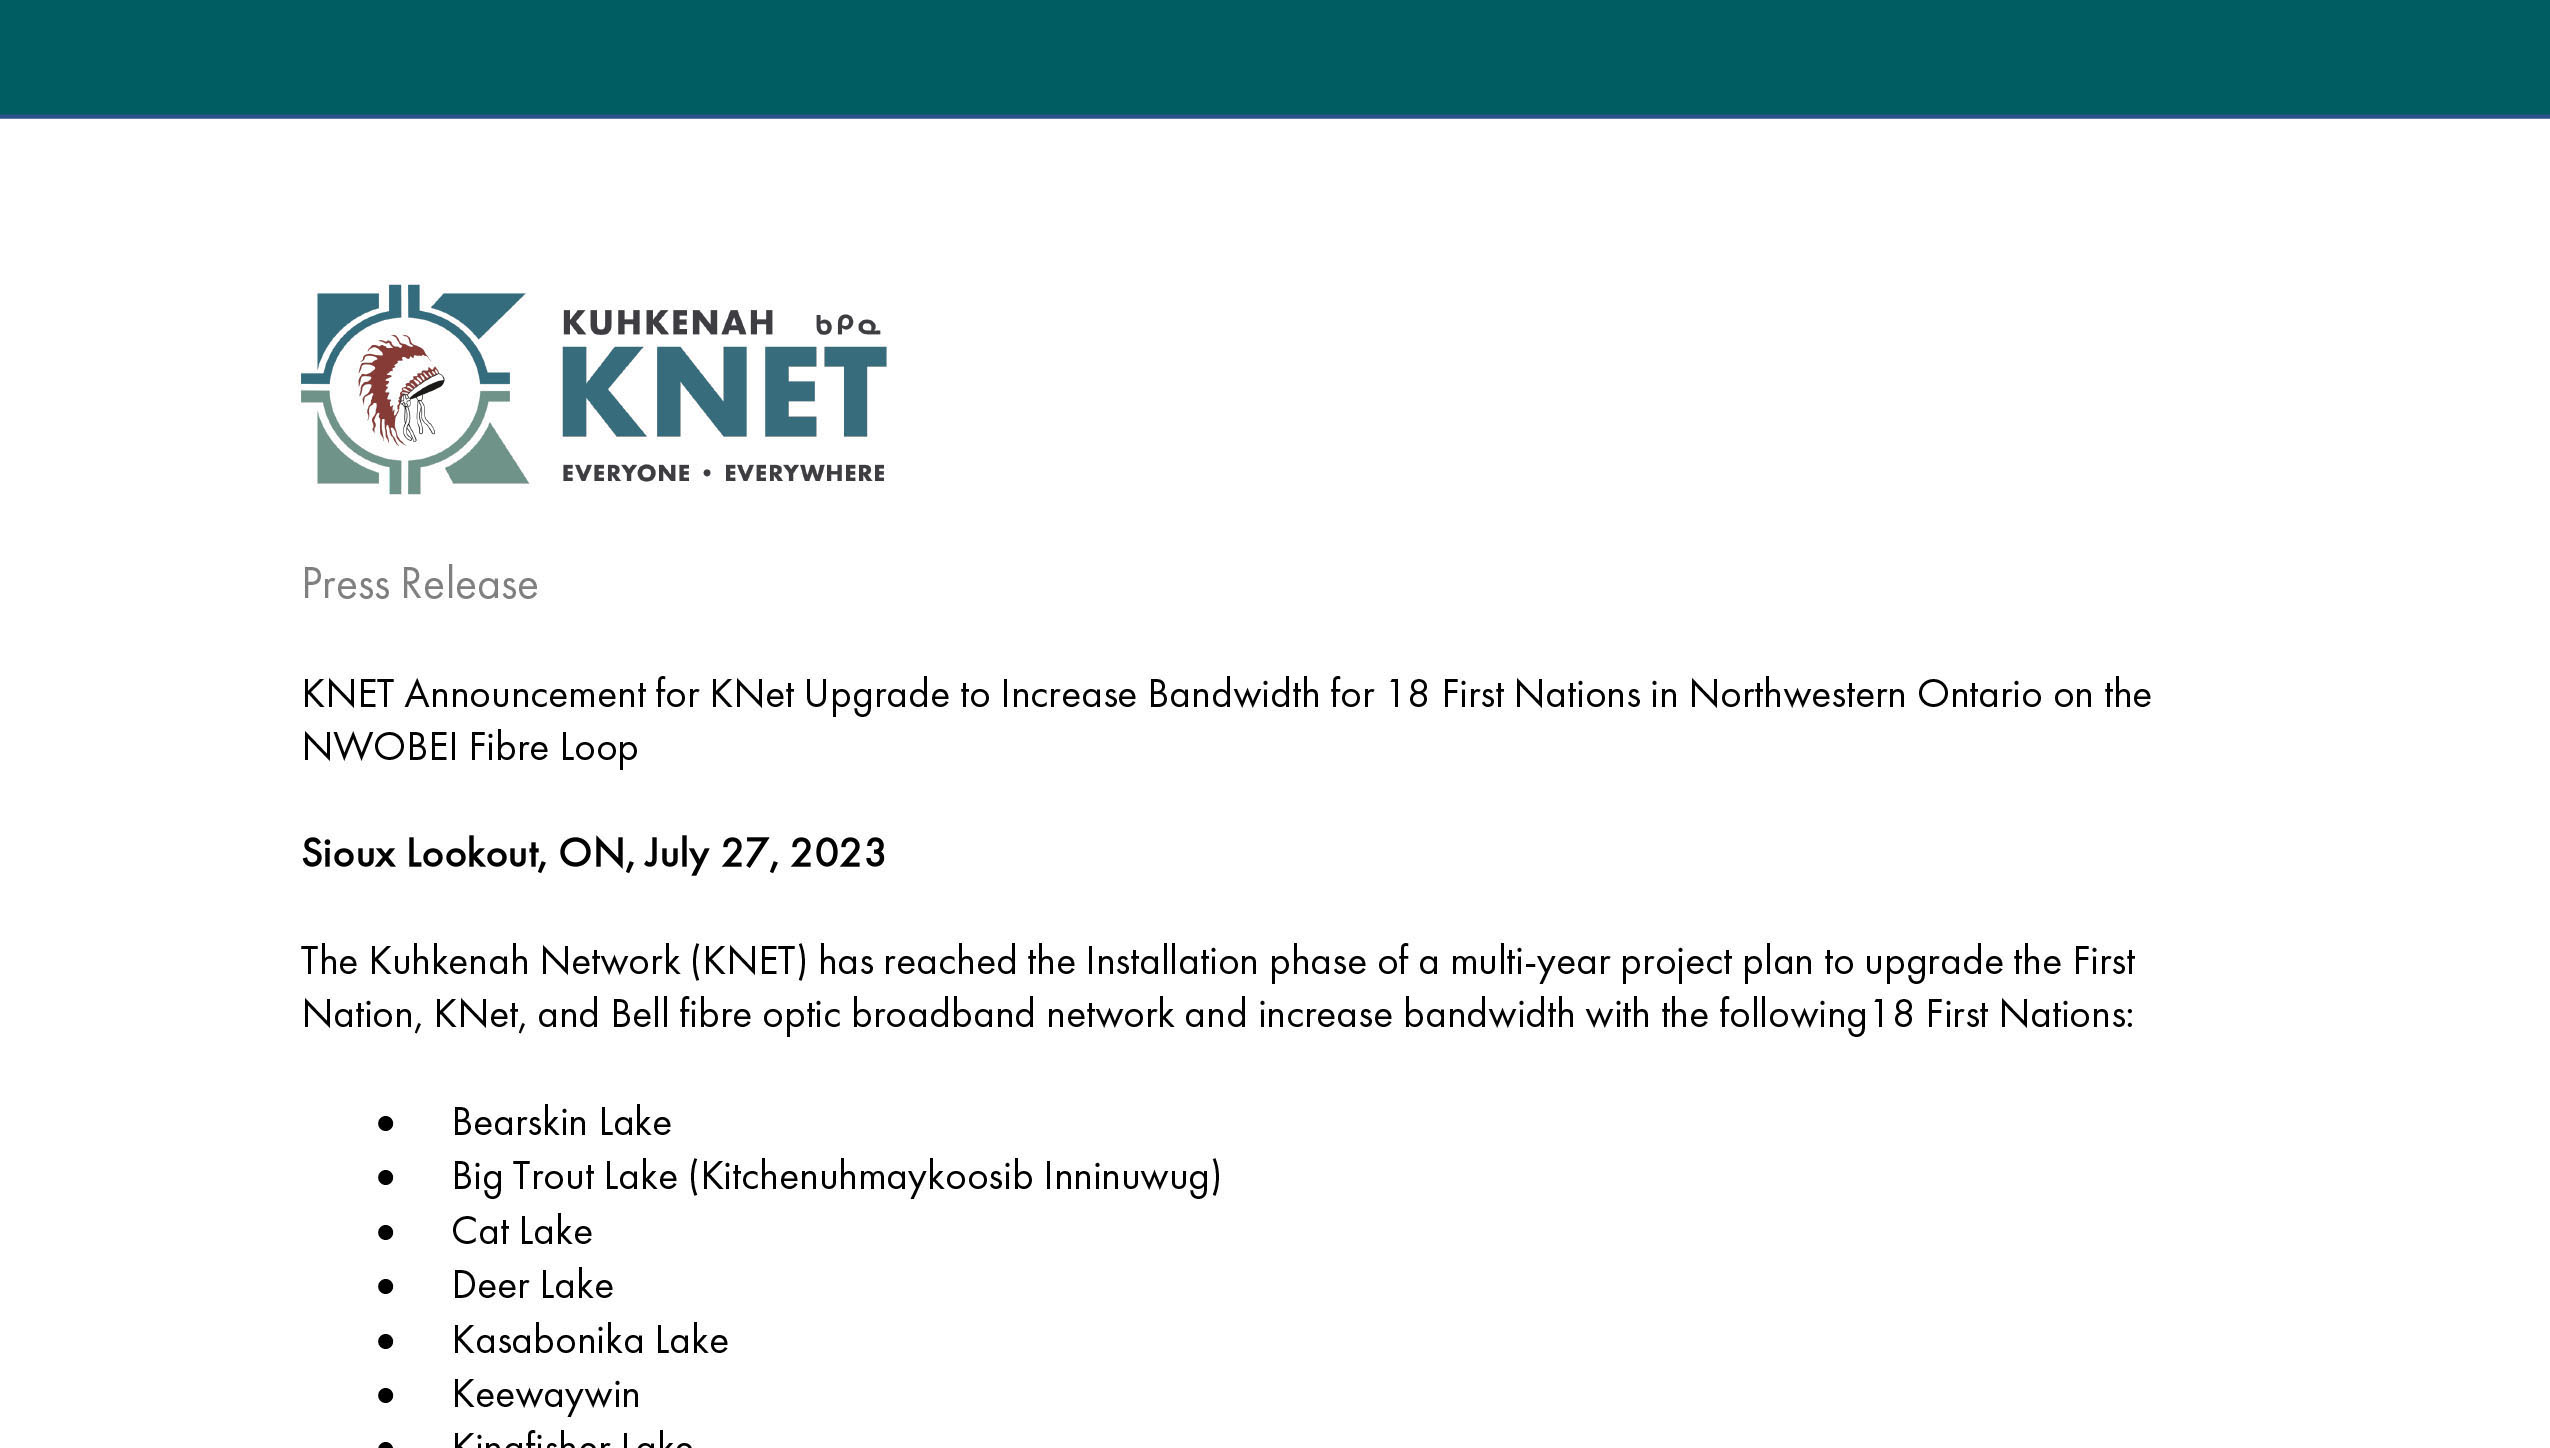 KNET Announcement for KNet Upgrade to Increase Bandwidth for 18 First Nations in Northwestern Ontario on the NWOBEI Fibre Loop​